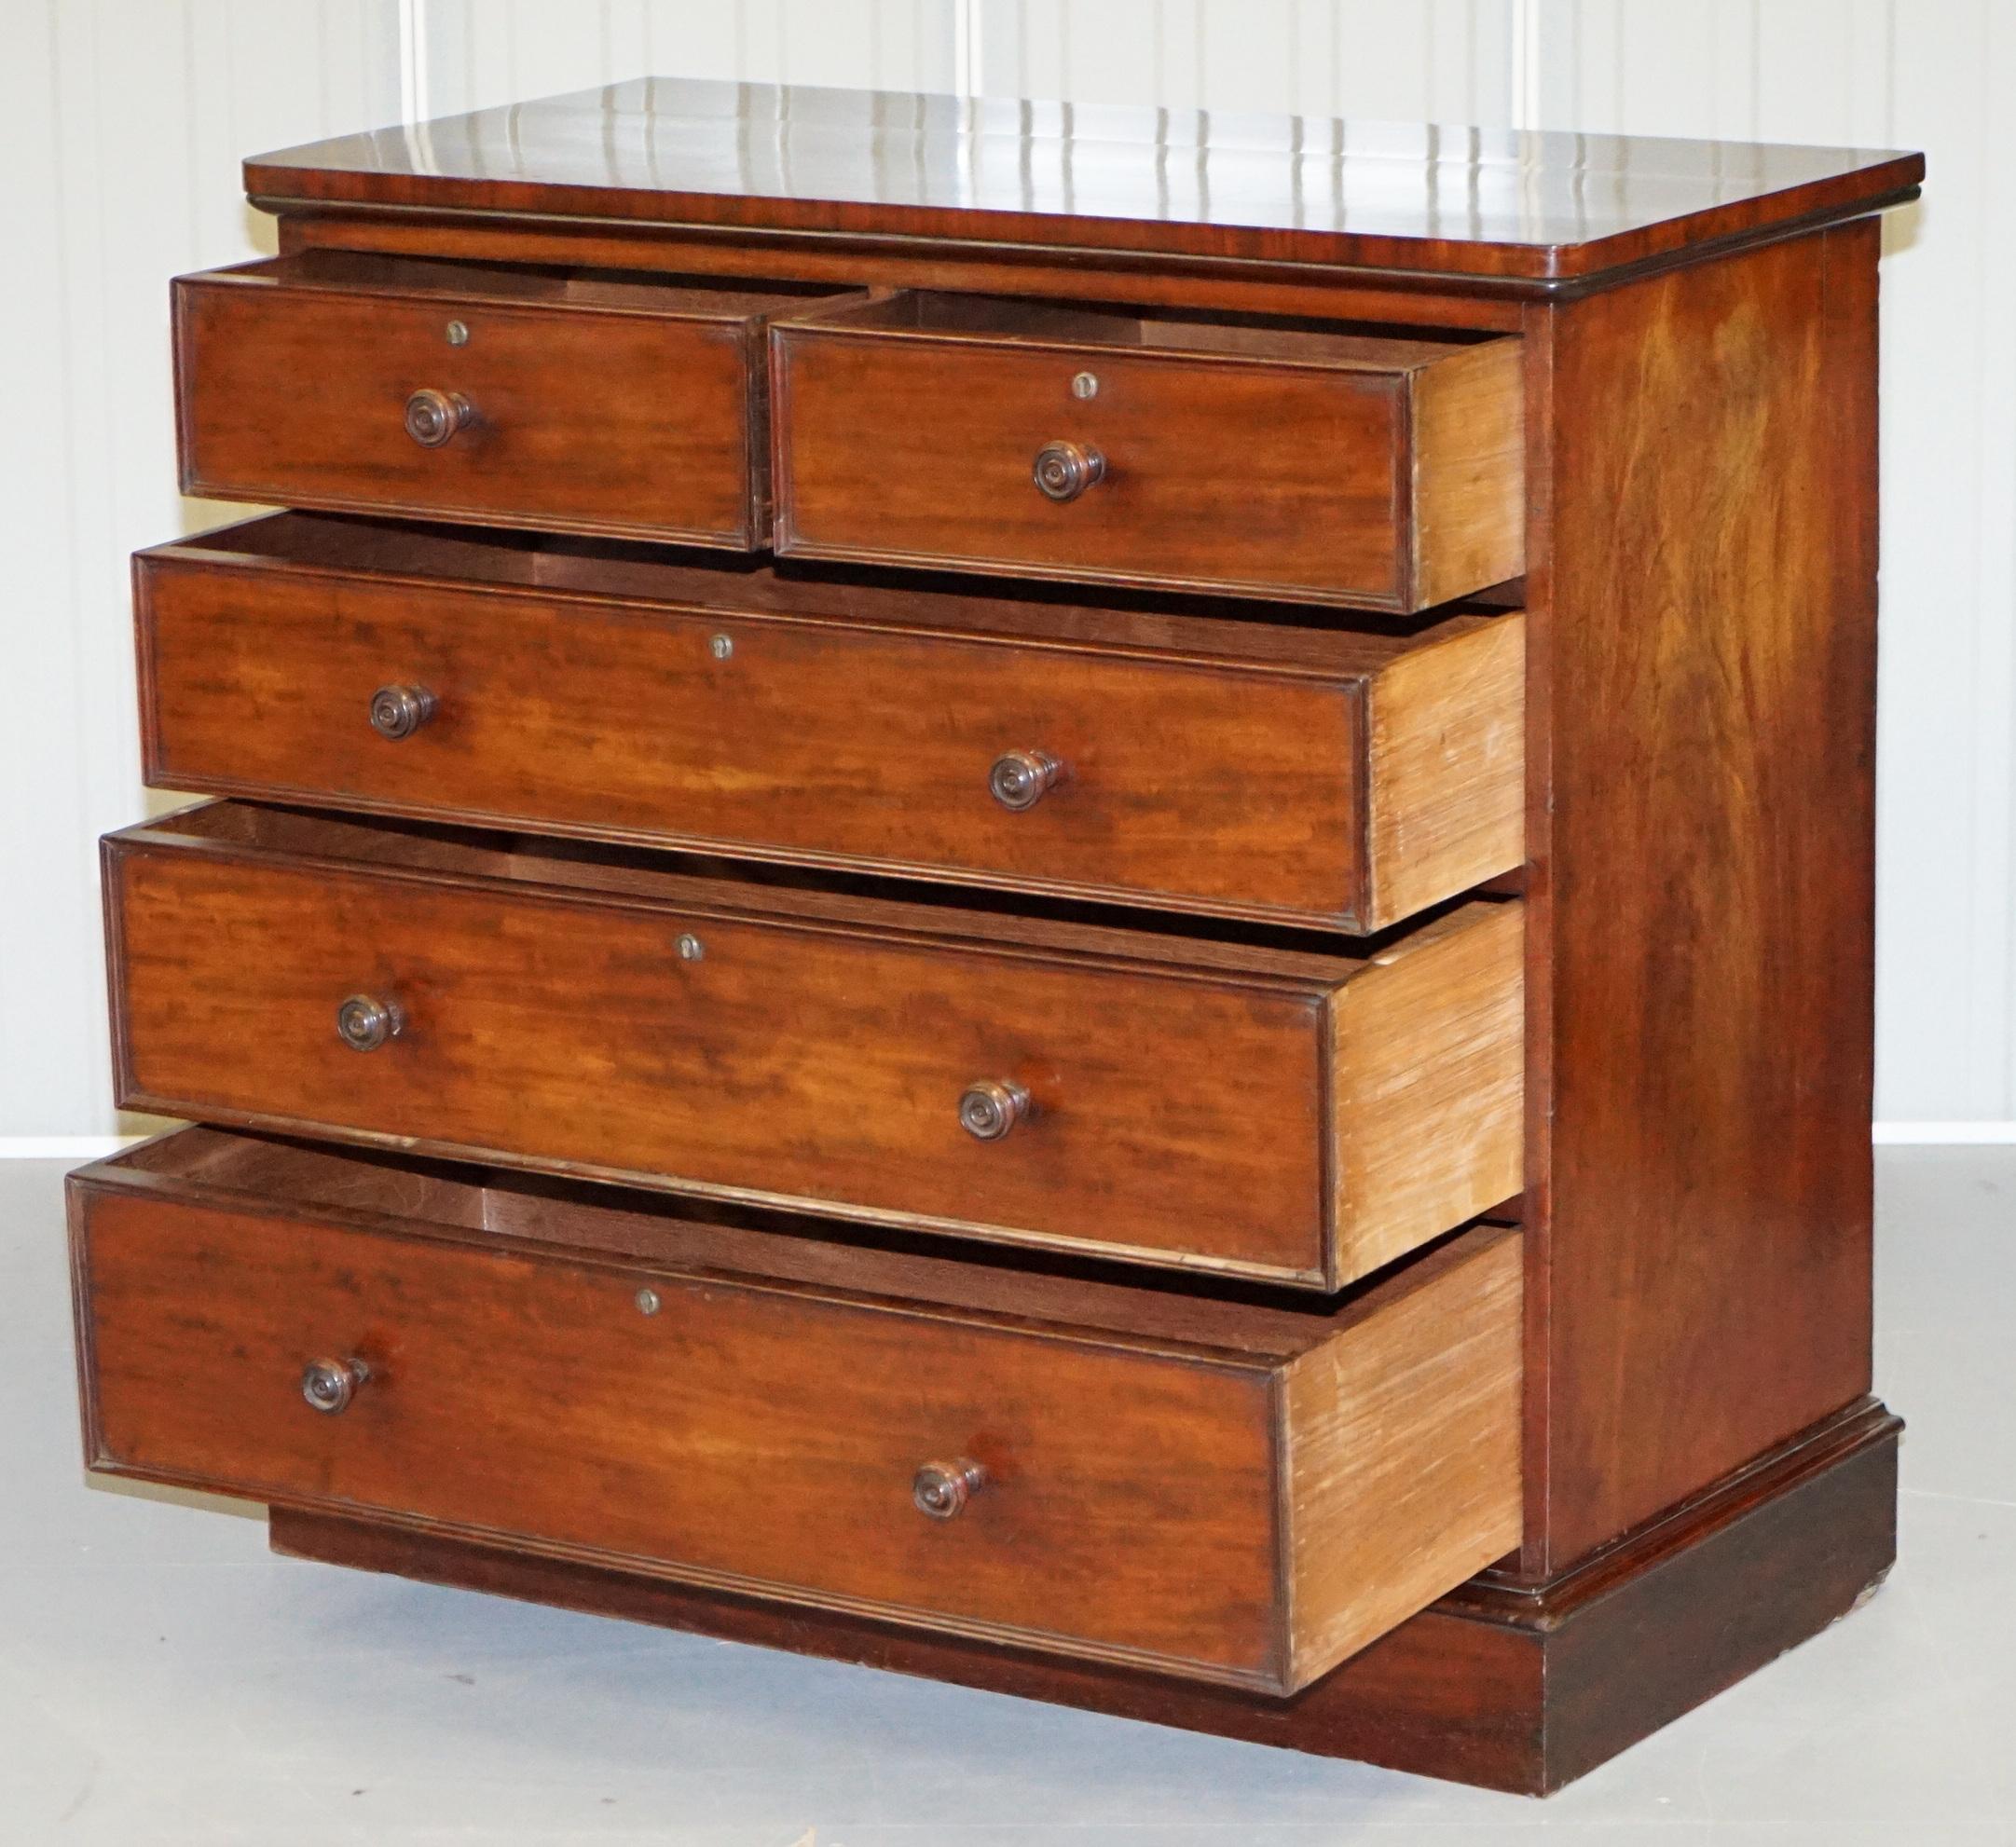 Rare circa 1760 Thomas Wilson 68 Great Queen Street Hardwood Chest of Drawers For Sale 9